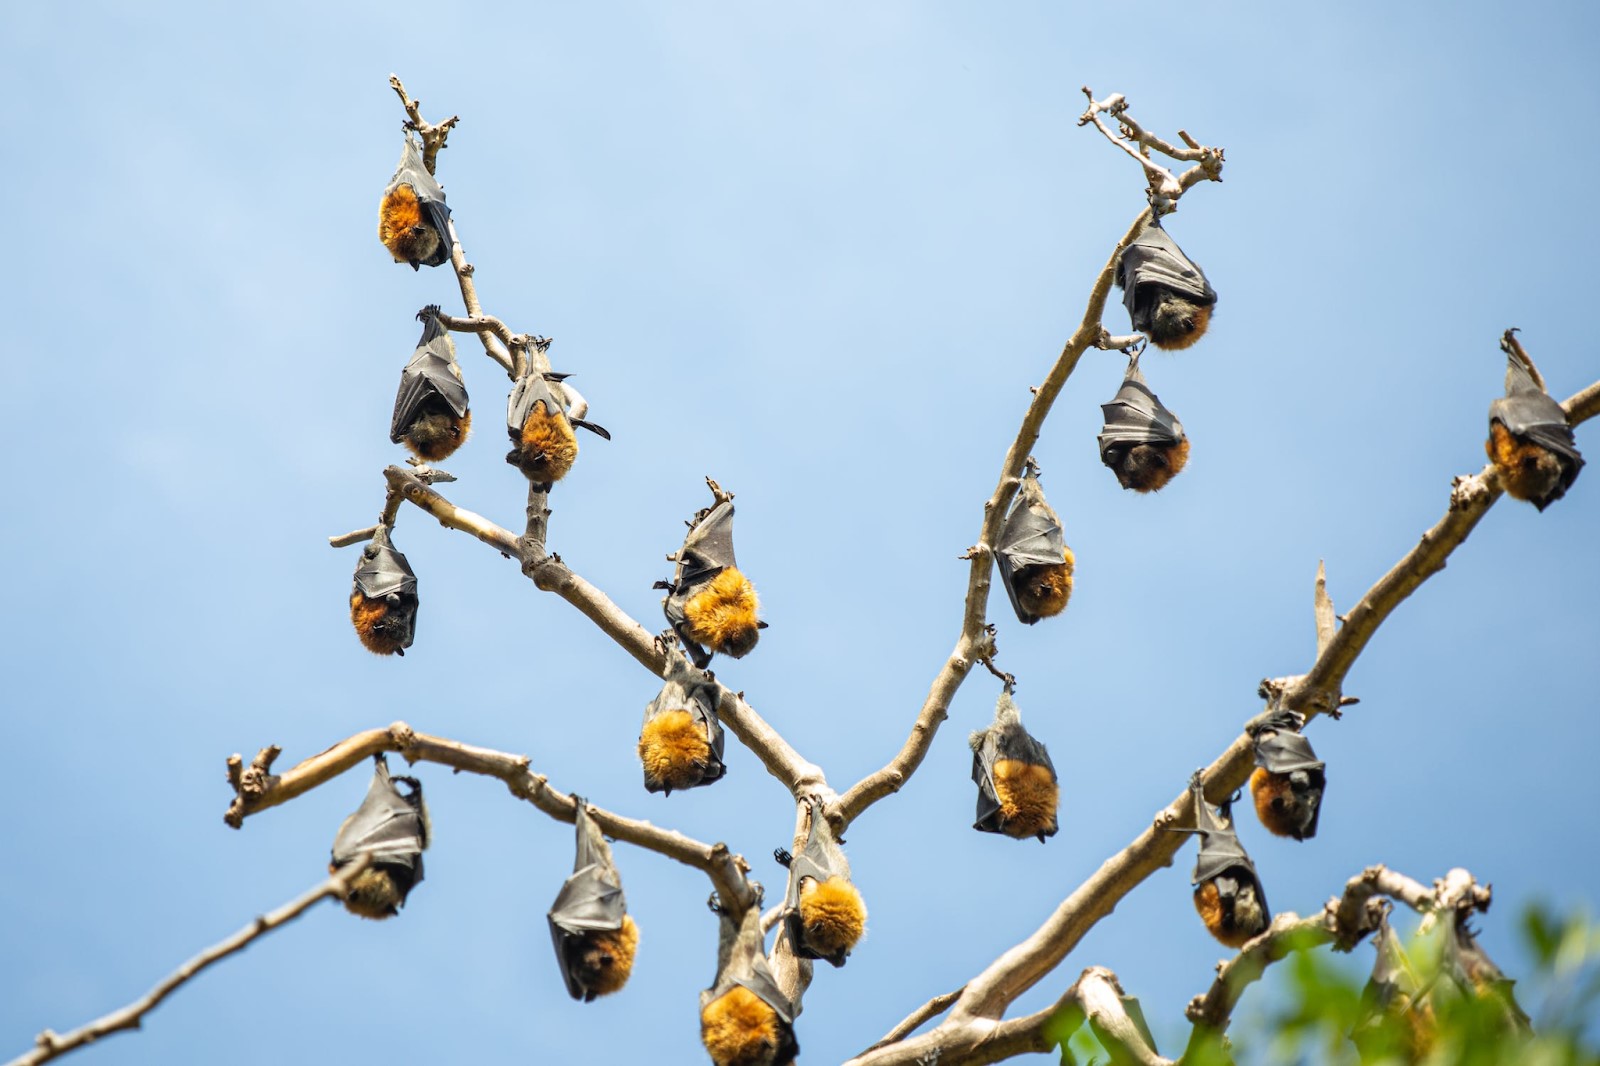 Bats Hanging Upside Down on Branches